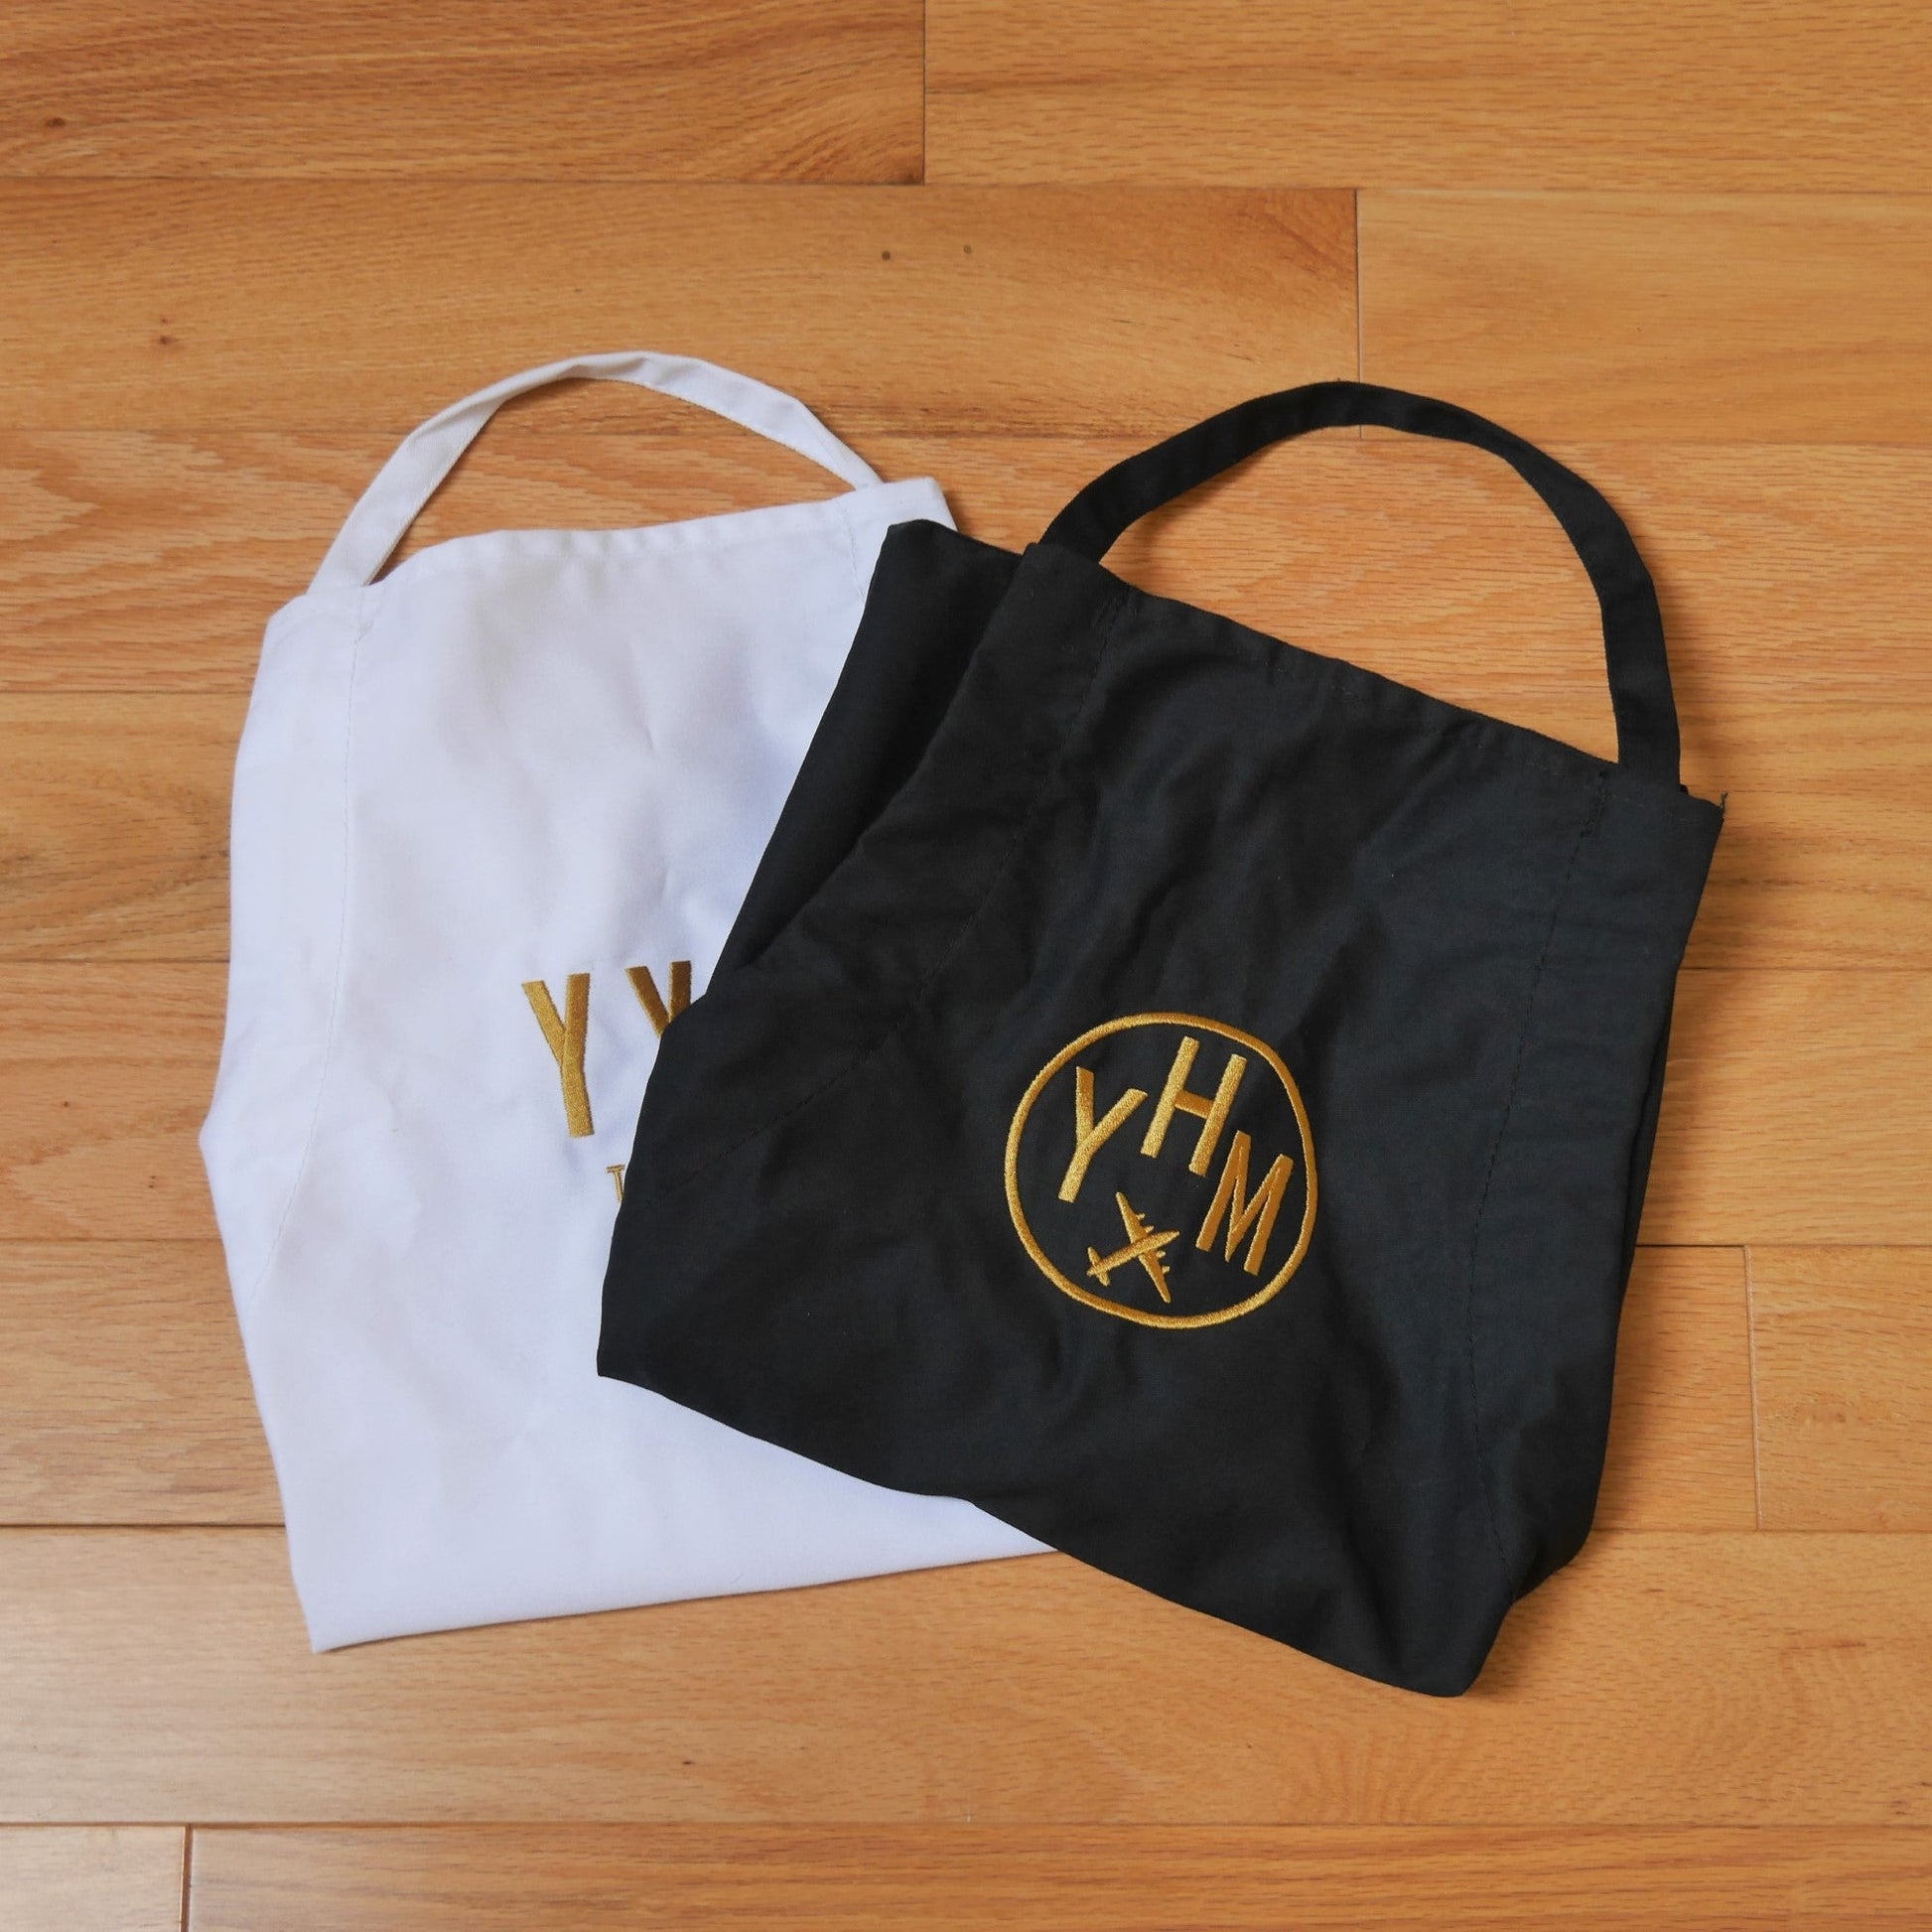 City Embroidered Apron - Old Gold • ICN Seoul • YHM Designs - Image 14